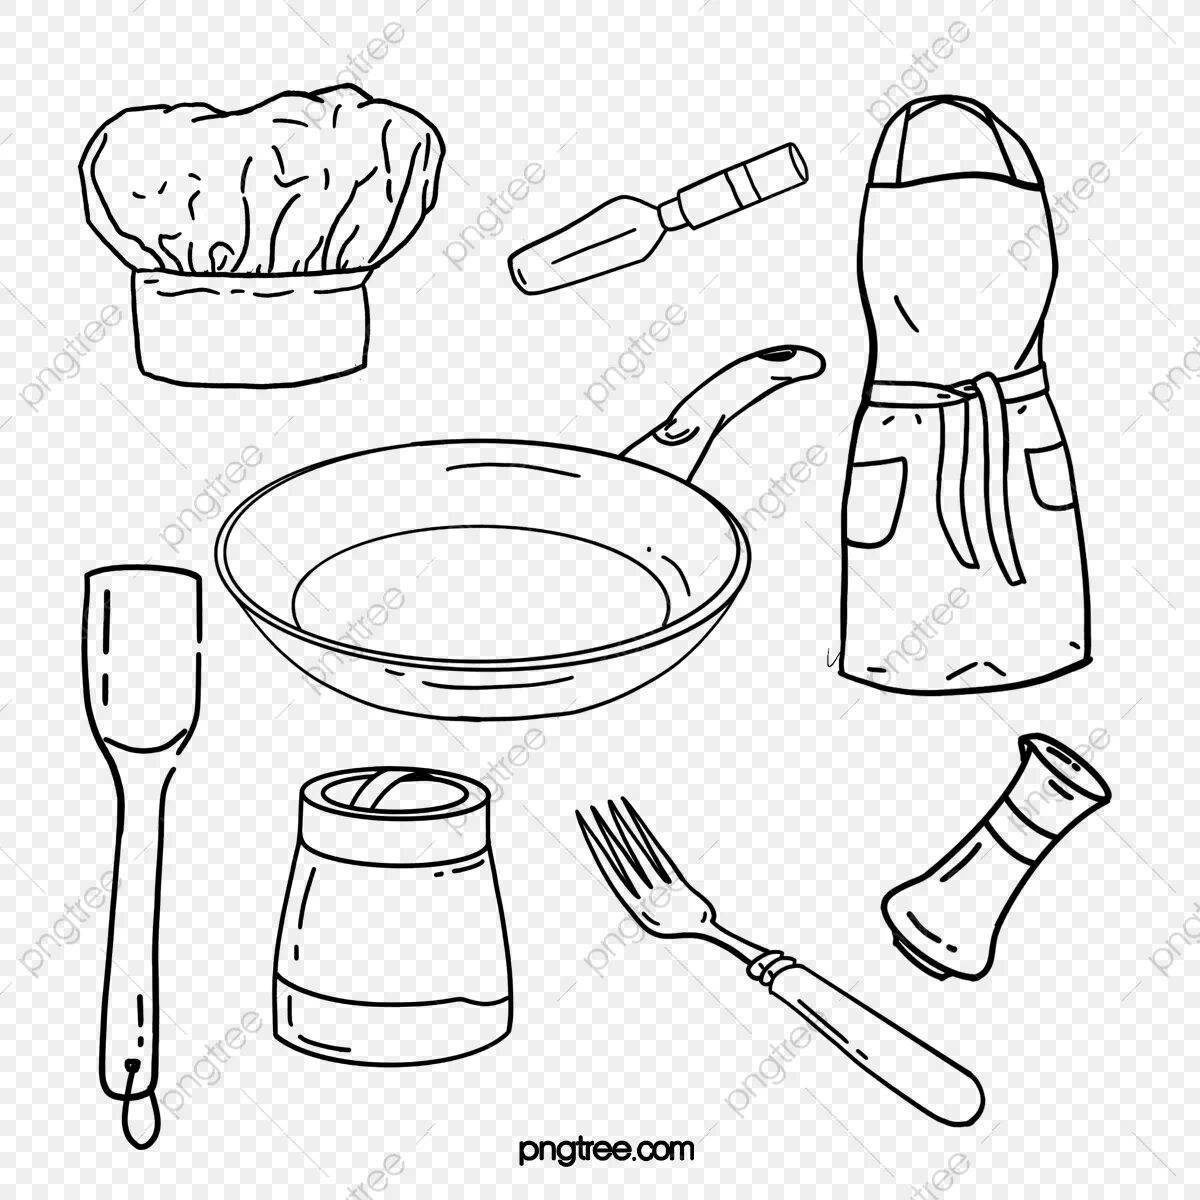 Fun cook tools coloring page